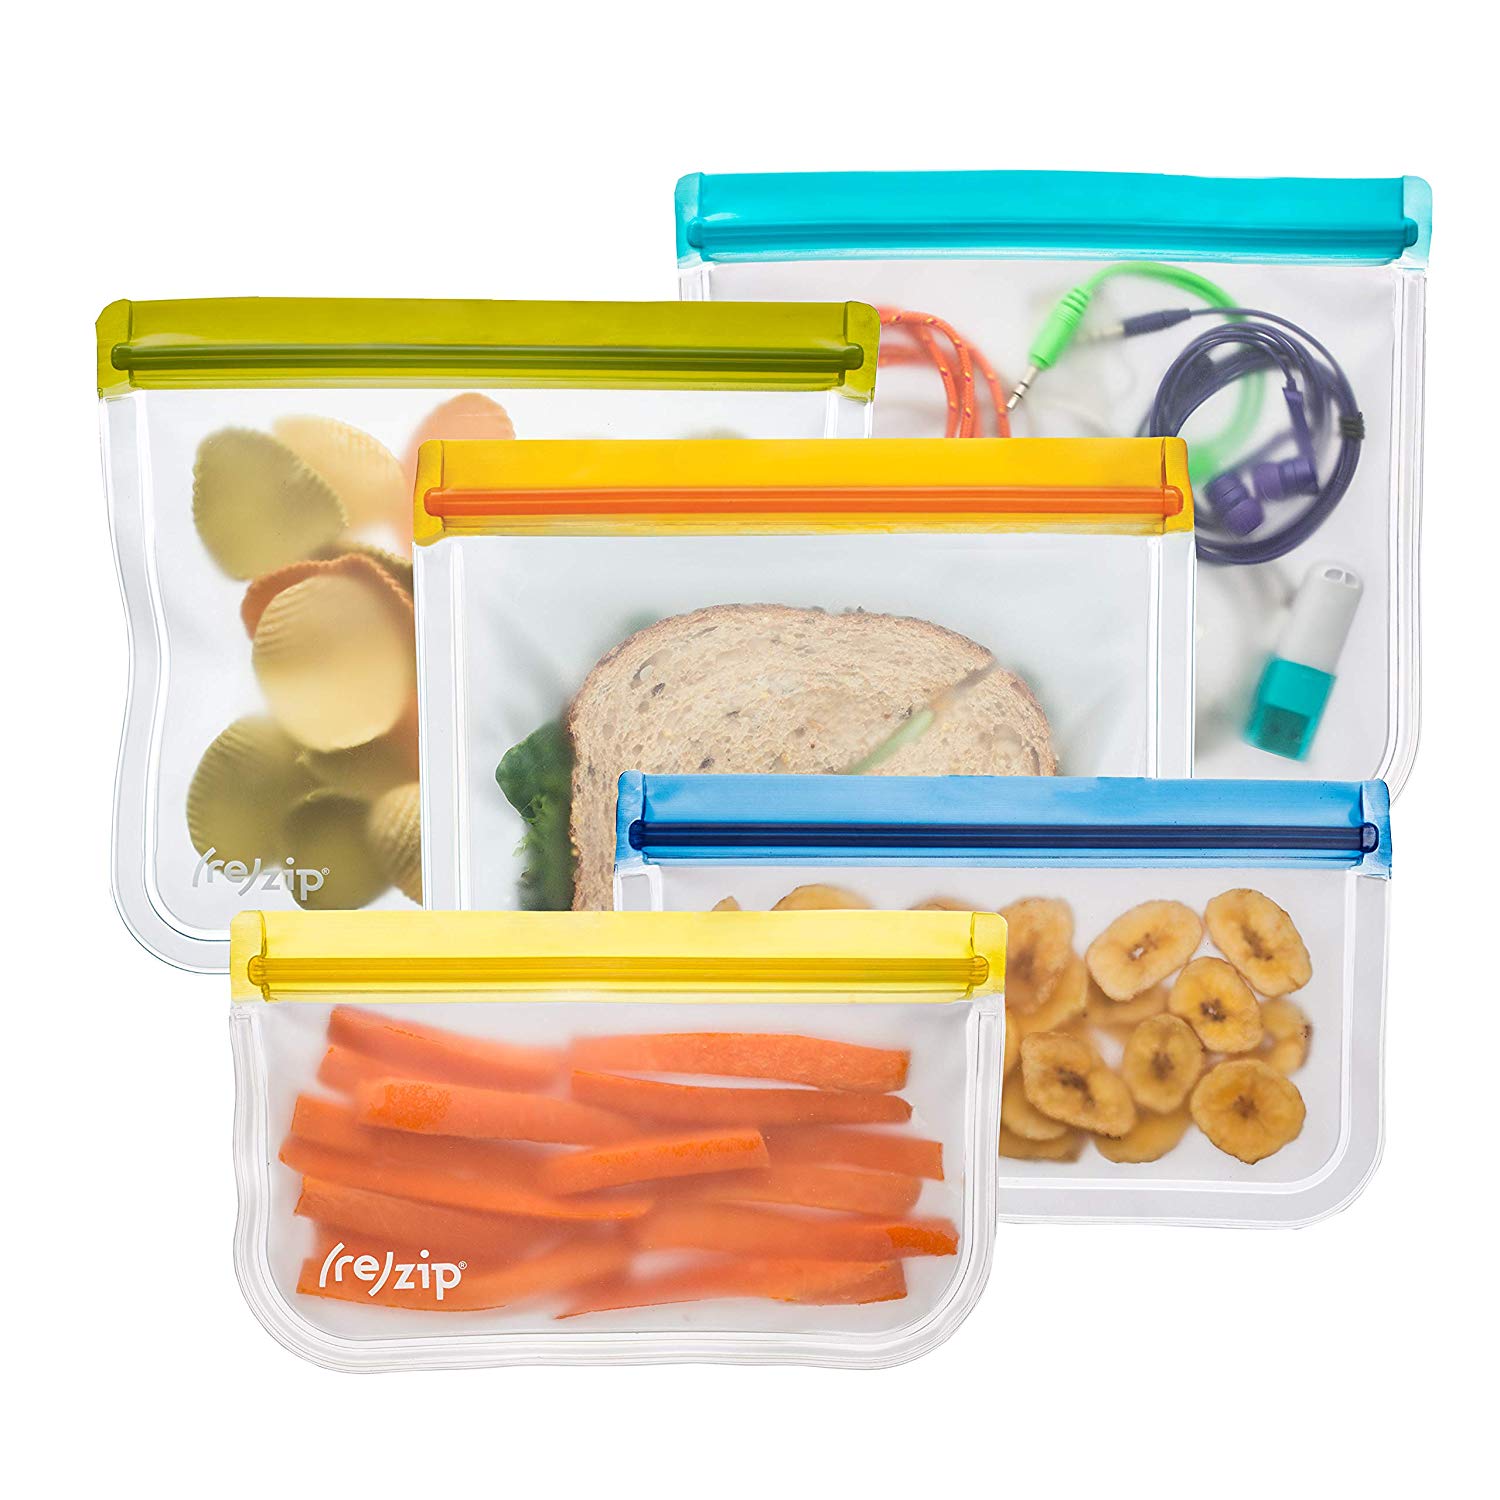 (re)zip - Lay Flat Lunch & Snack Bag Kit